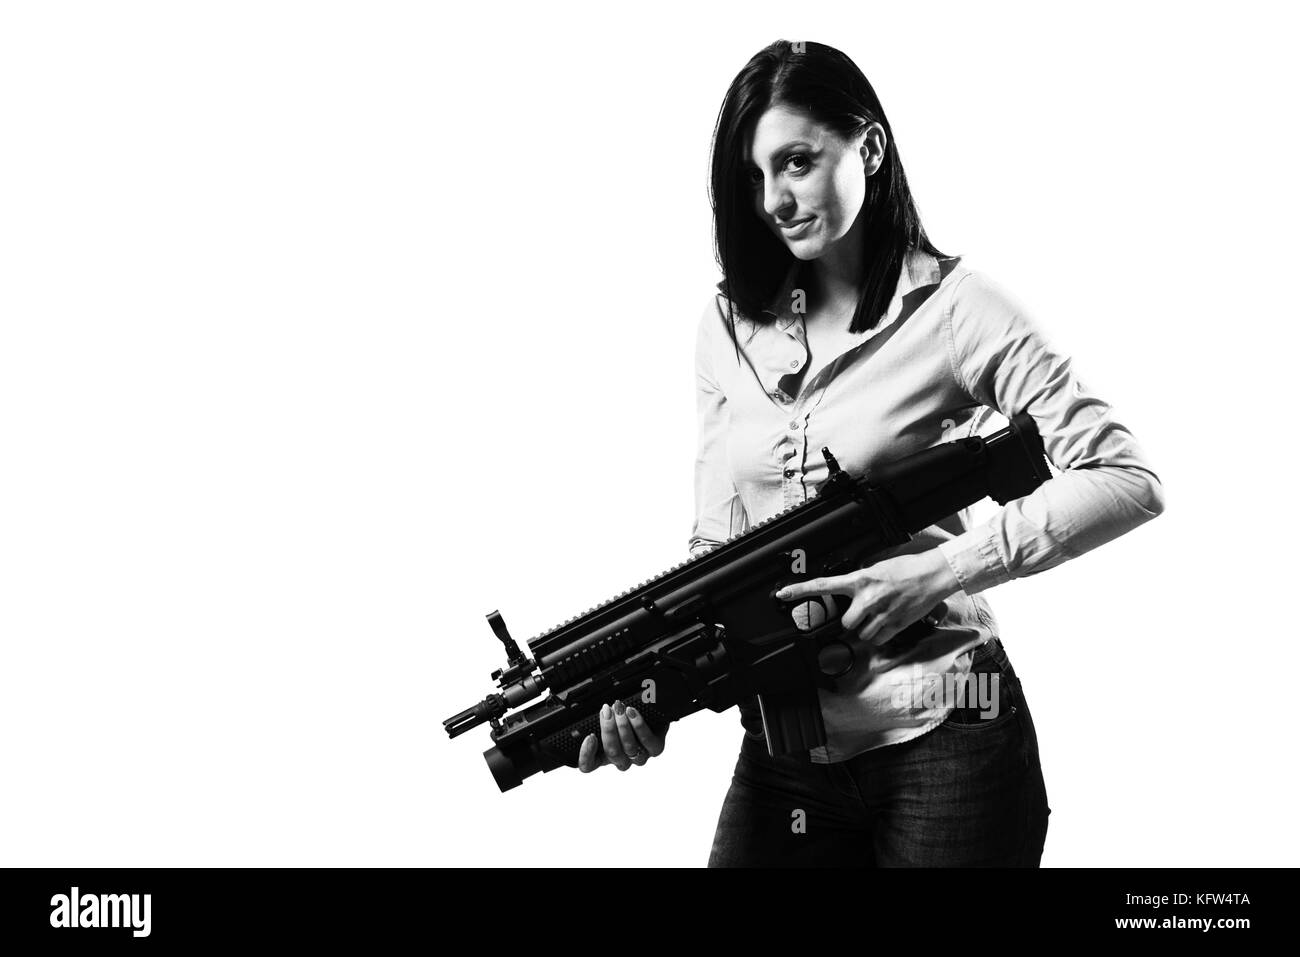 Woman Isolated on a White Background With a Handgun as She Turns and Aims Off Camera Stock Photo